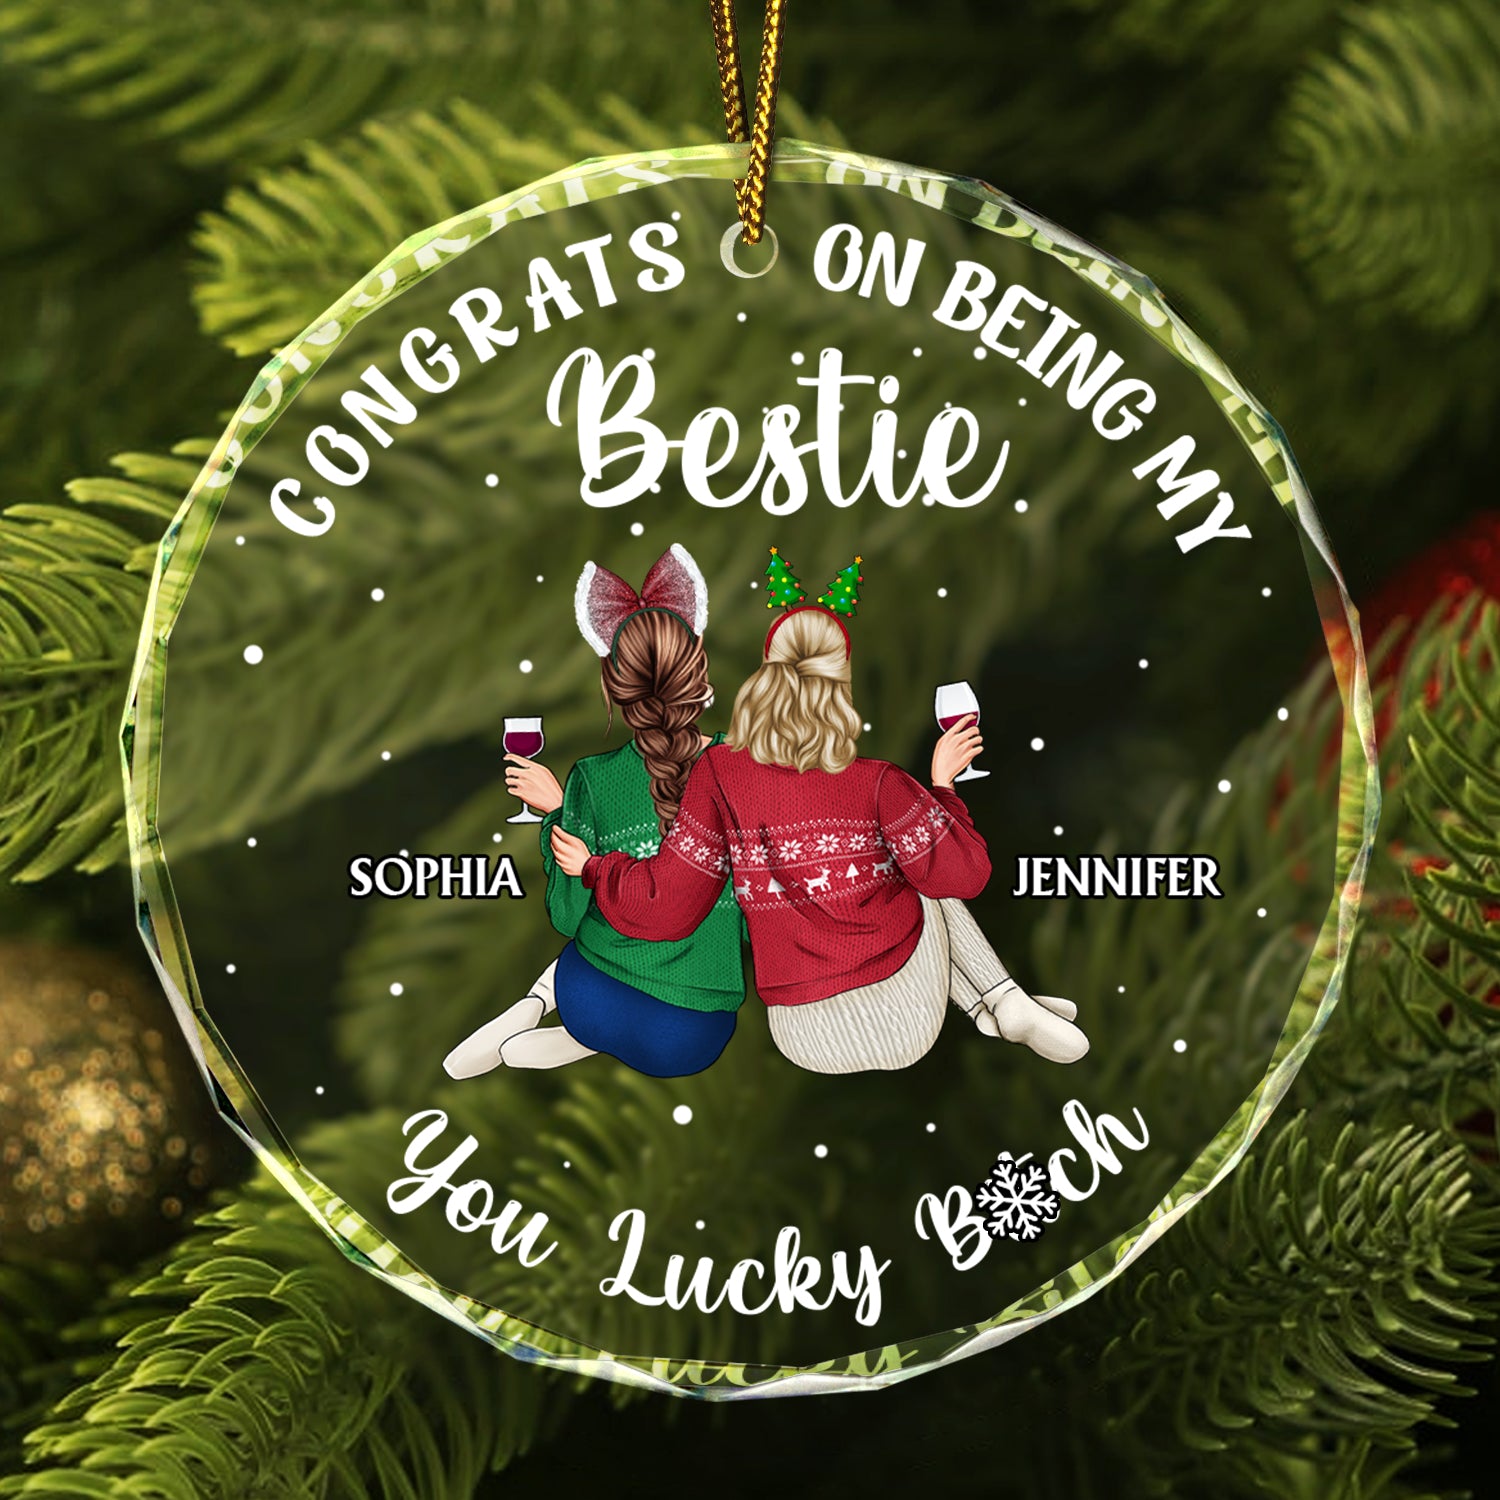 Congrats On Being My Besties - Christmas Gifts For Besties, Friends - Personalized Circle Glass Ornament